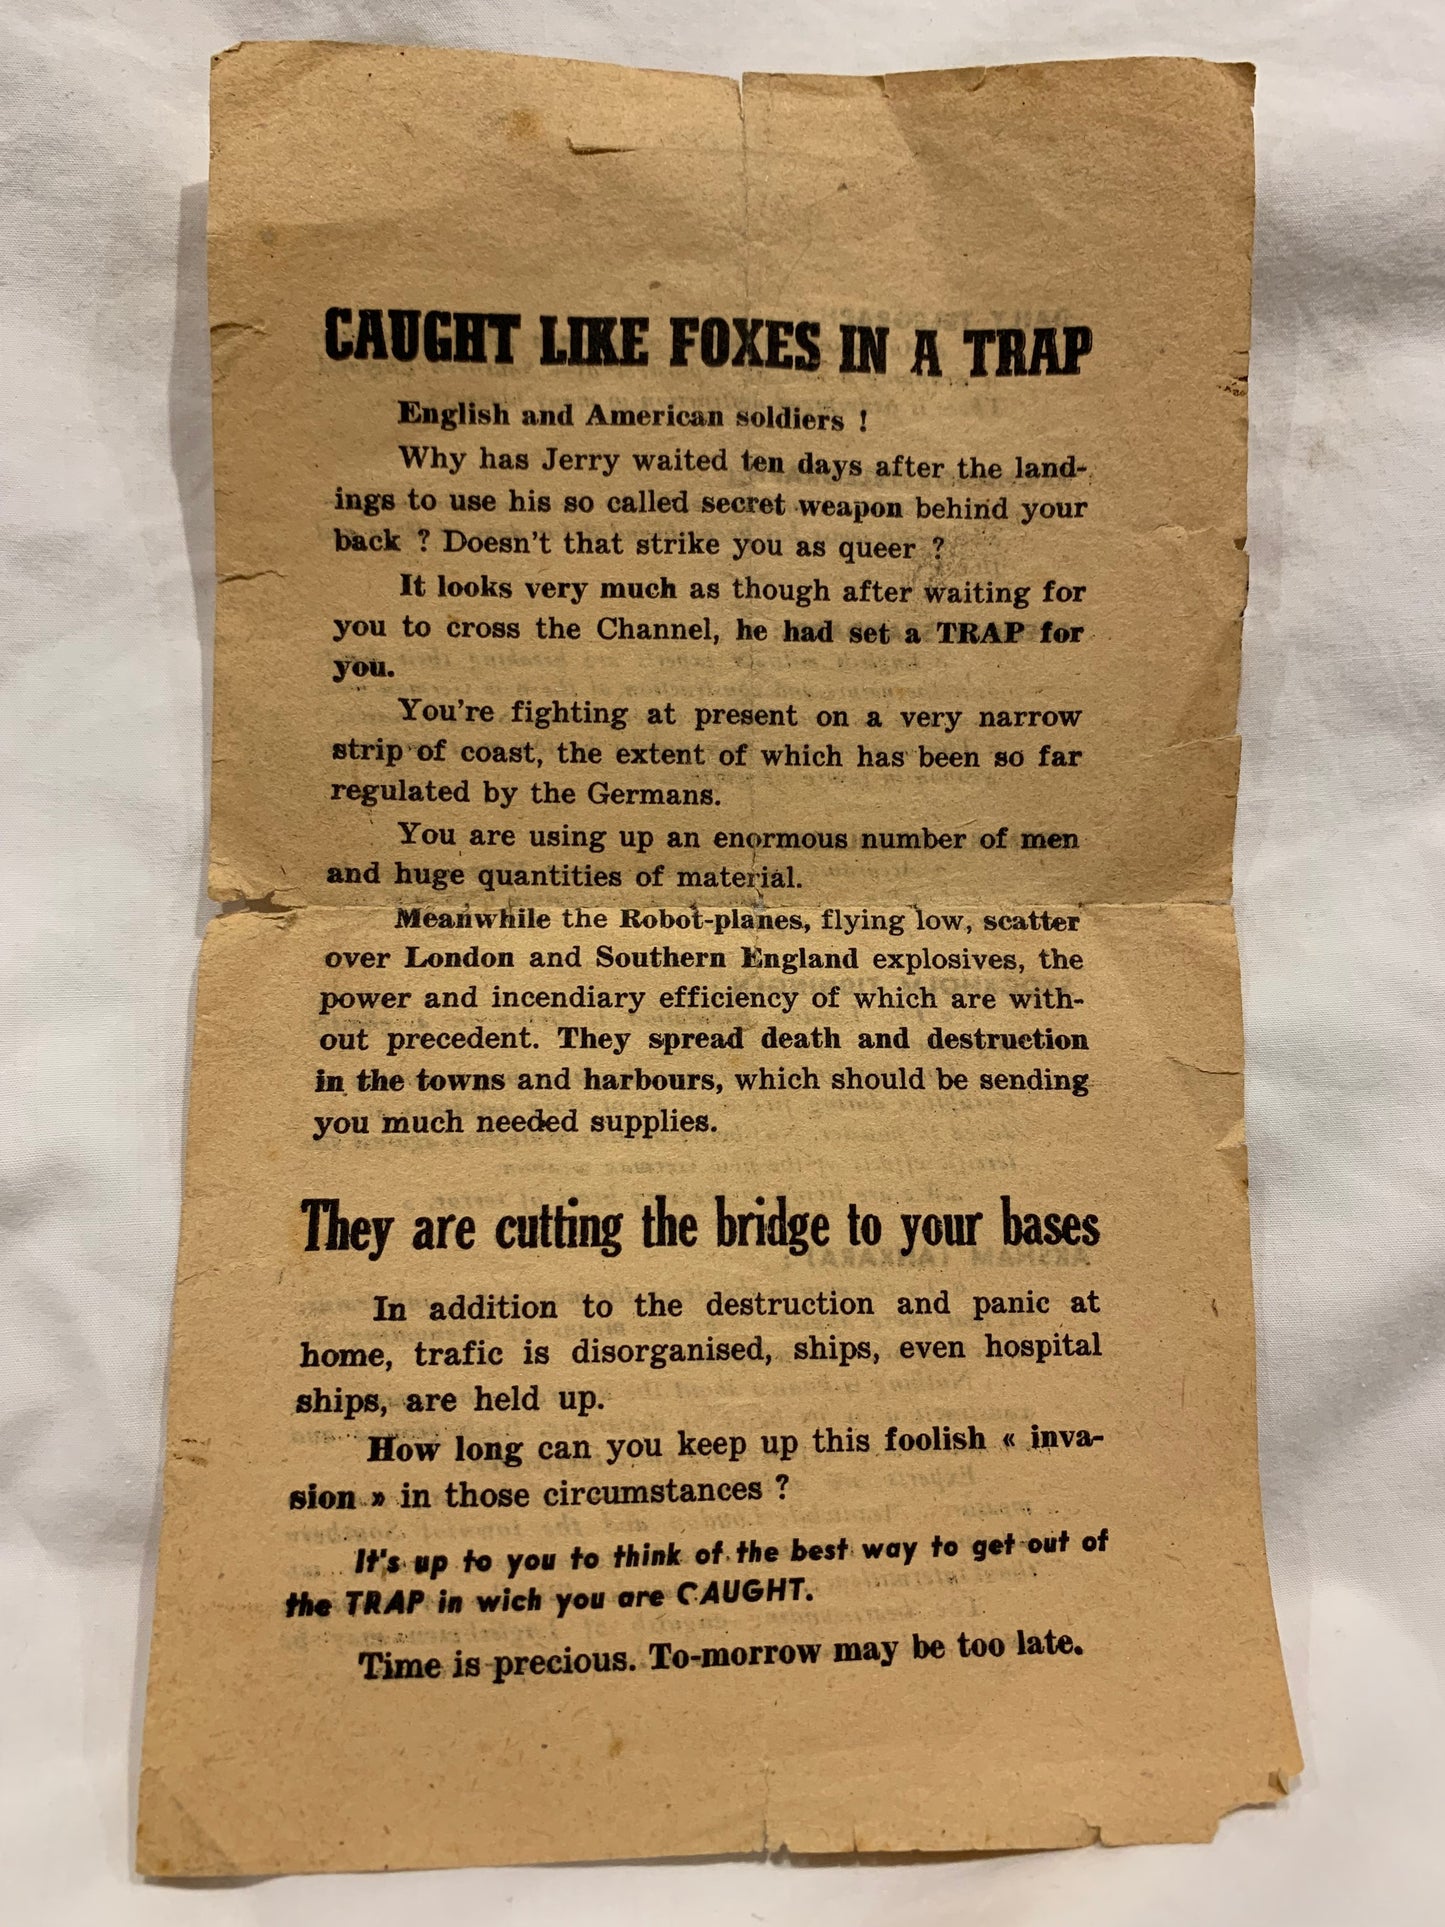 WW2 Propaganda Leaflet dropped by the Germans at Normandy 1944